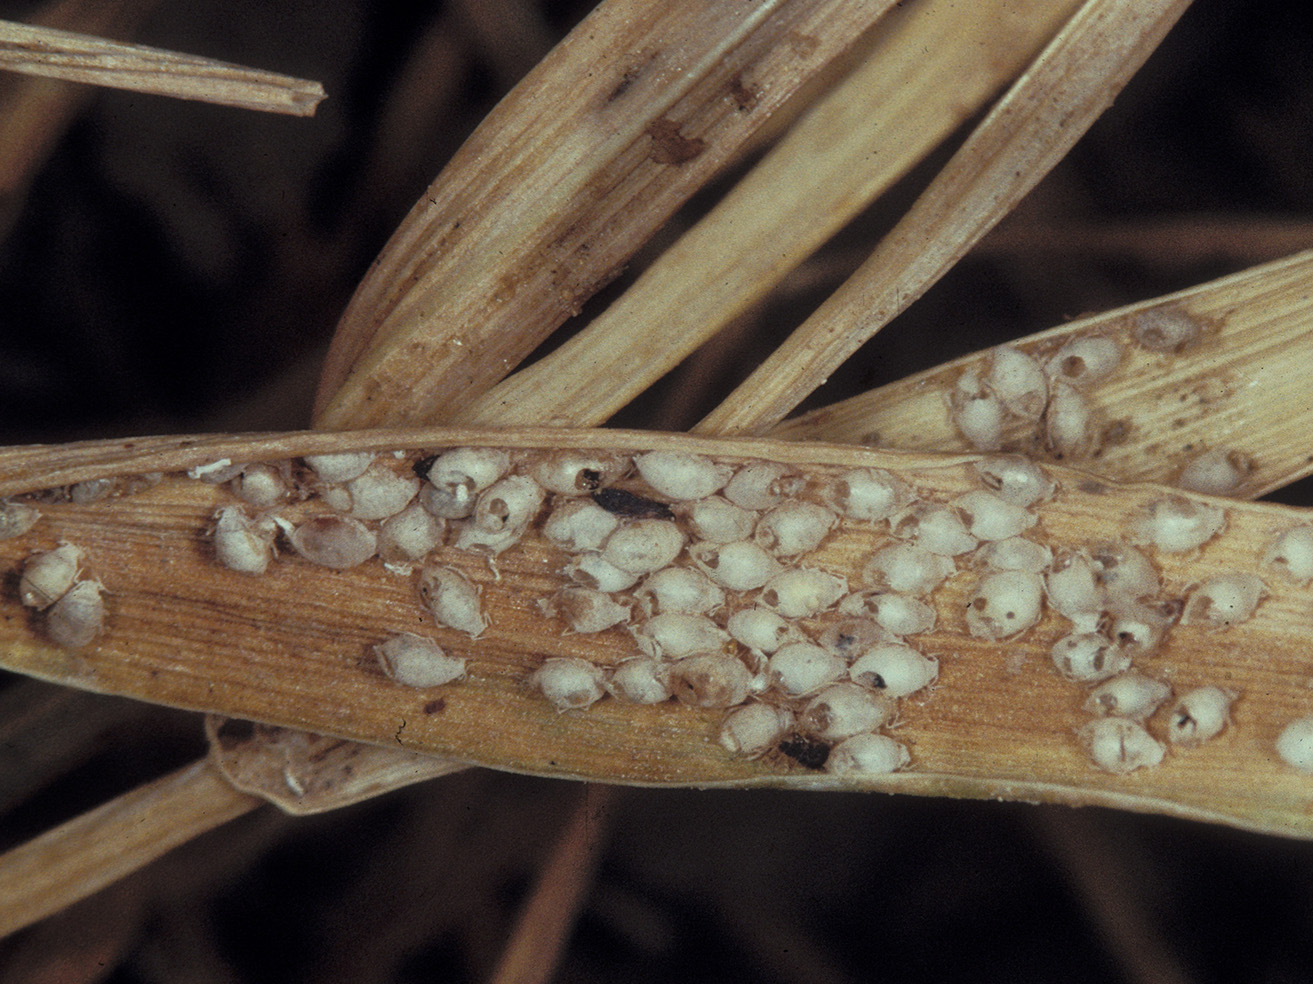 Fig. 11. Many Russian wheat aphid “mummies” as a result from parasitoid attack. Note the exit holes from the adult wasps.